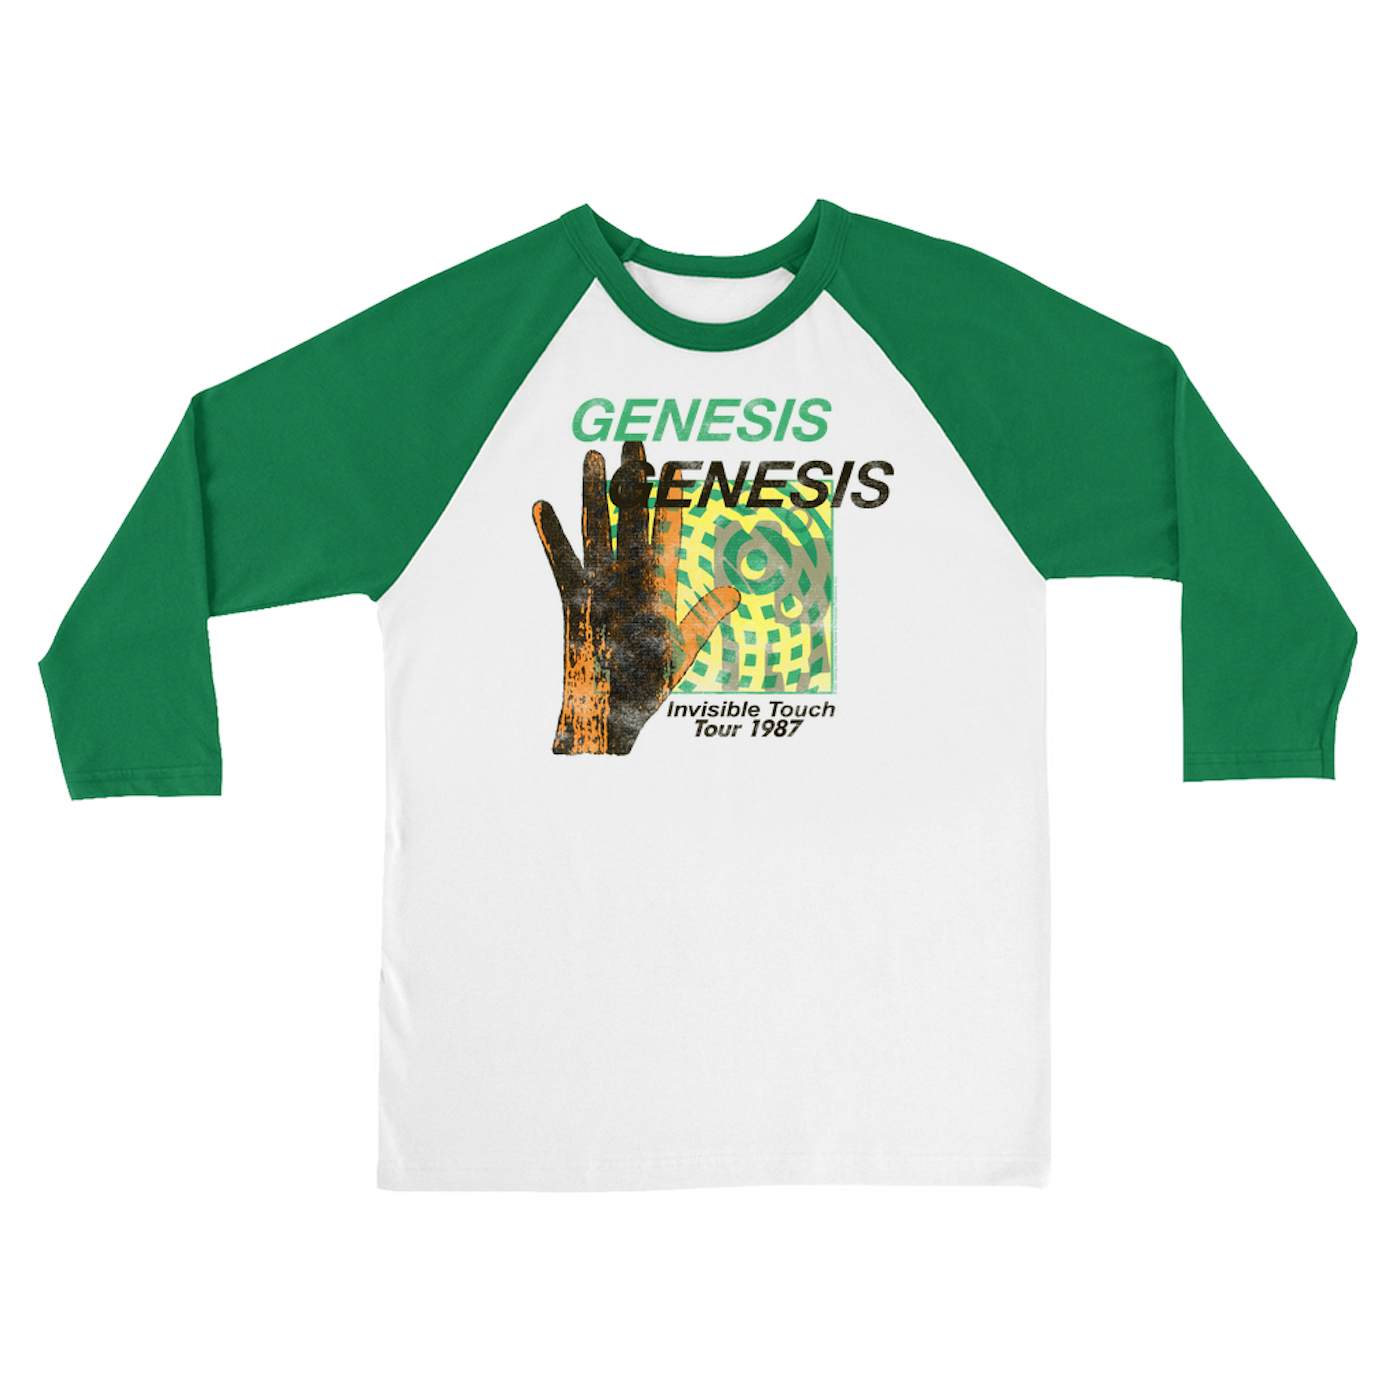 Genesis 3/4 Sleeve Baseball Tee | Invisible Touch 1987 Tour Genesis Shirt